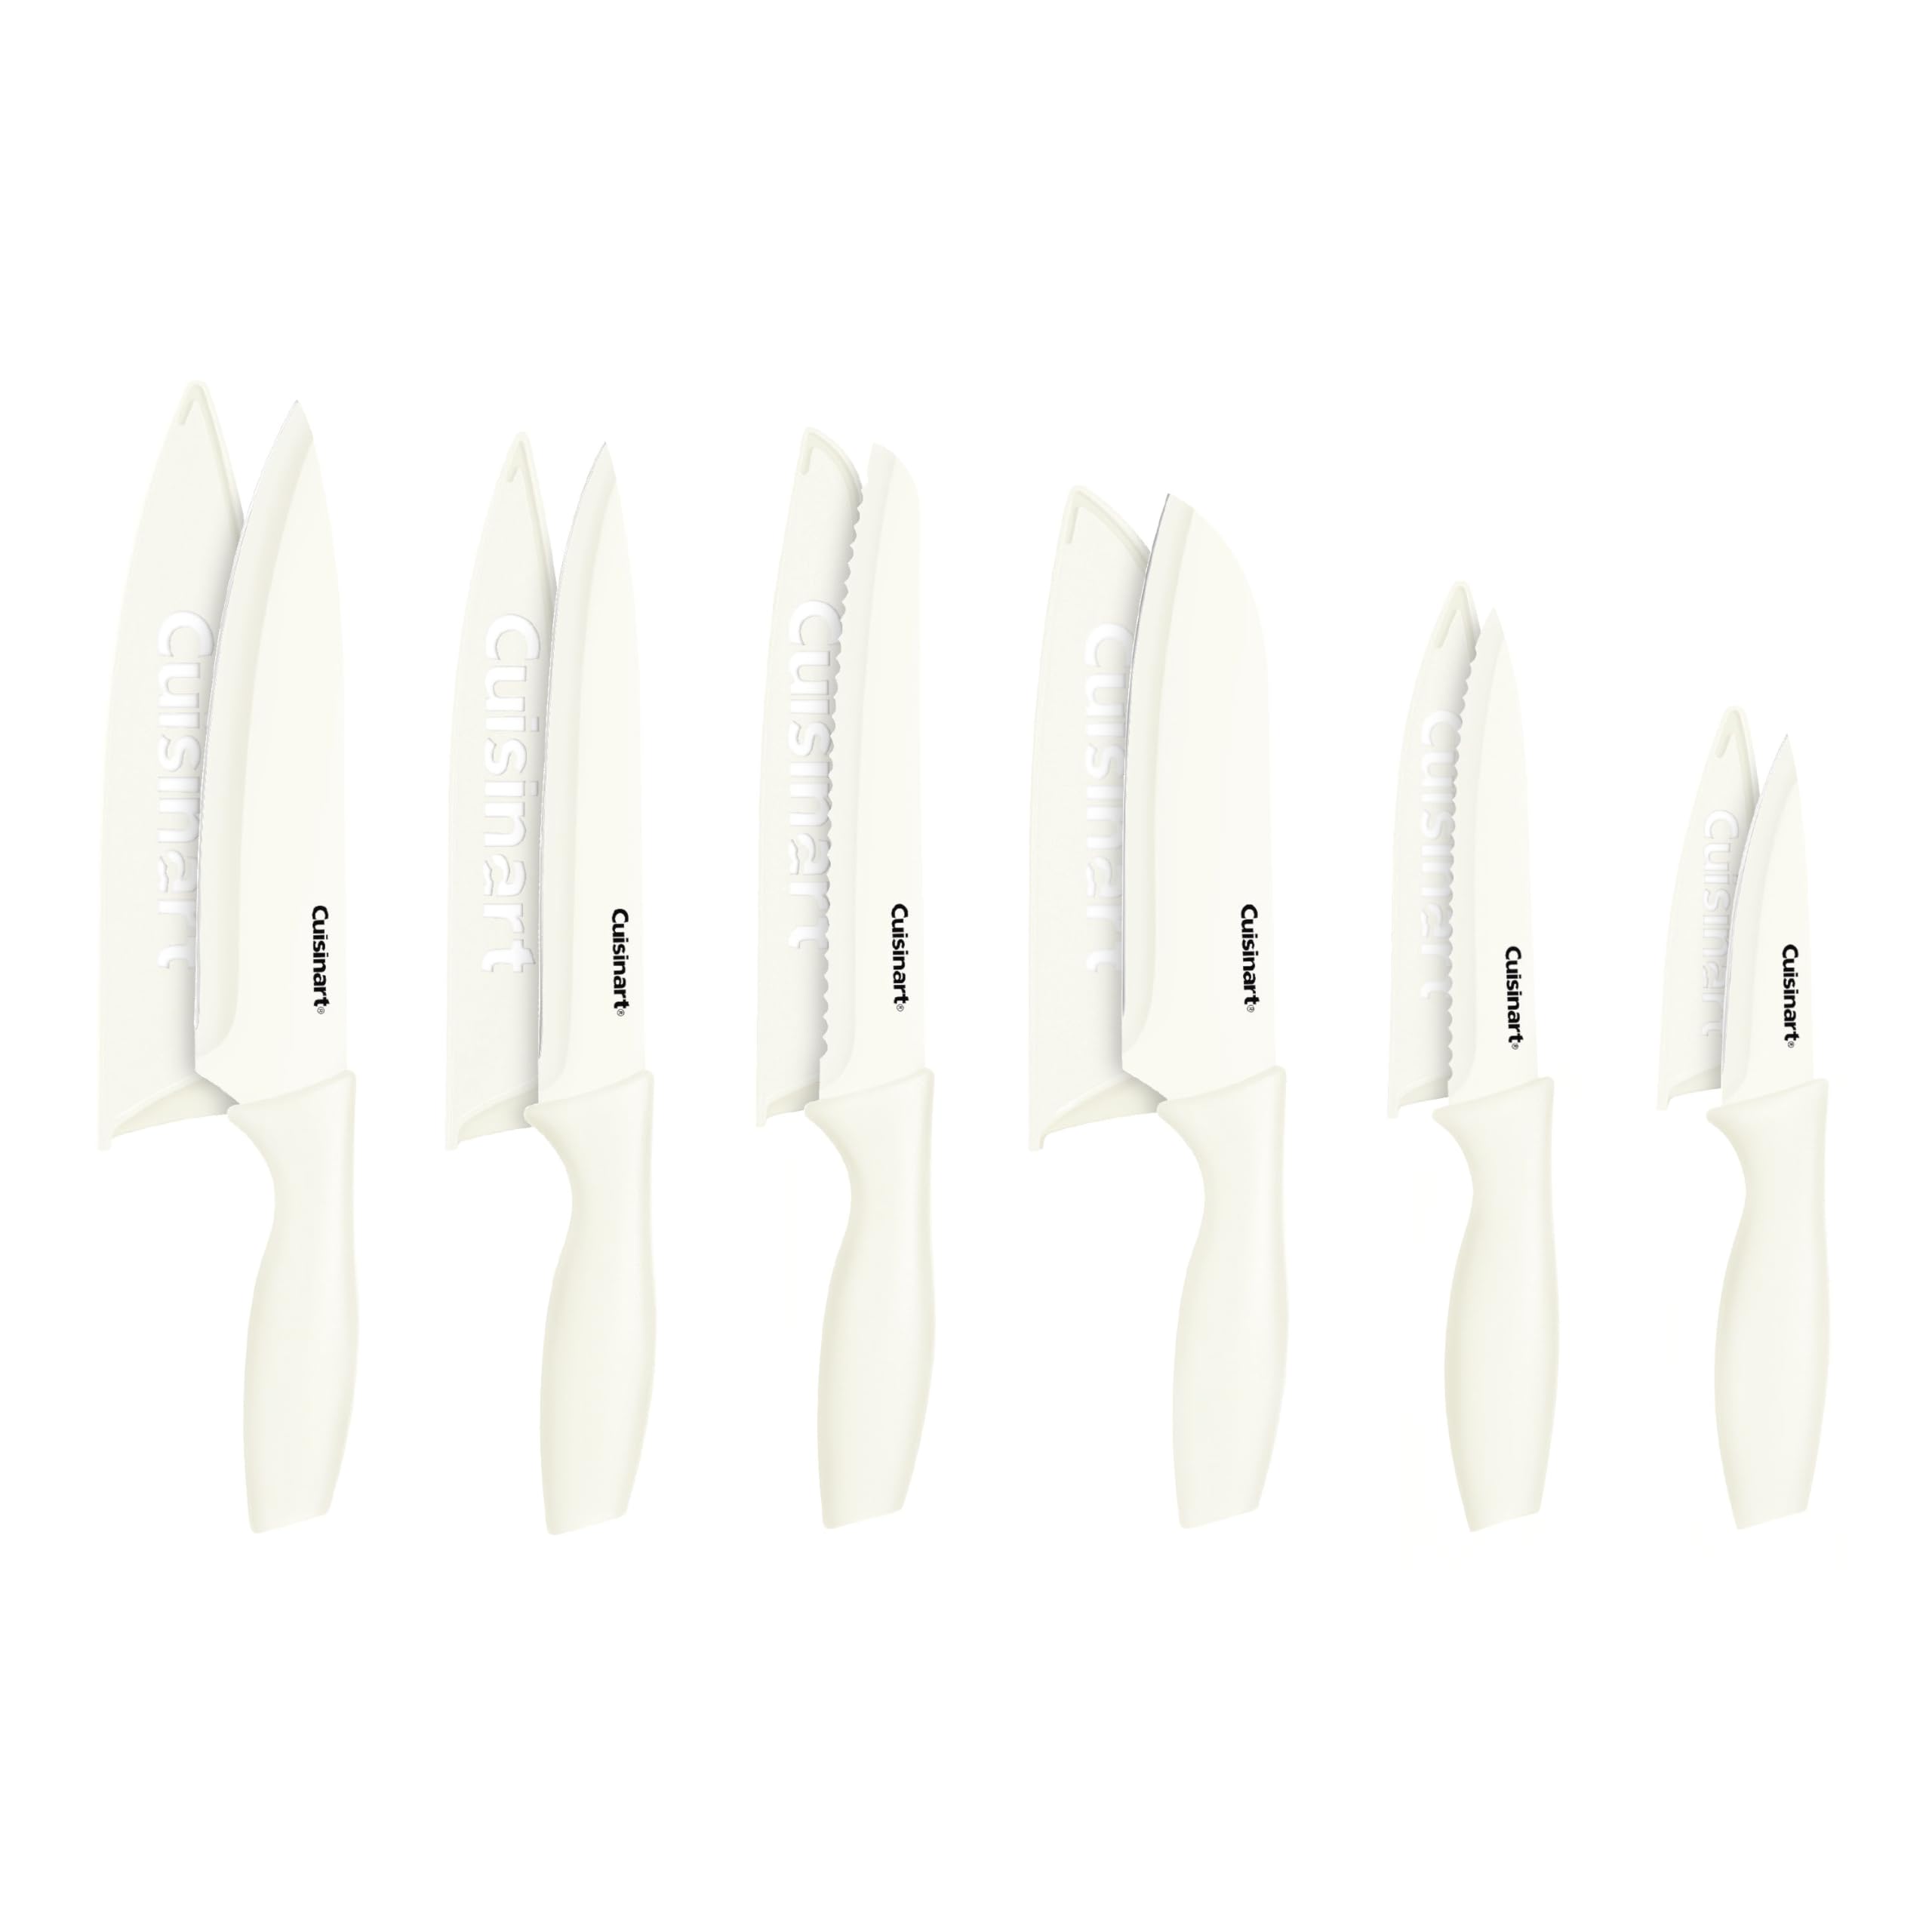 Cuisinart Knife Set, 12pc Cermaic Knife Set with 6 Blades & 6 Blade Guards, Lightweight, Stainless Steel, Durable & Dishwasher Safe (Cream), C55-12